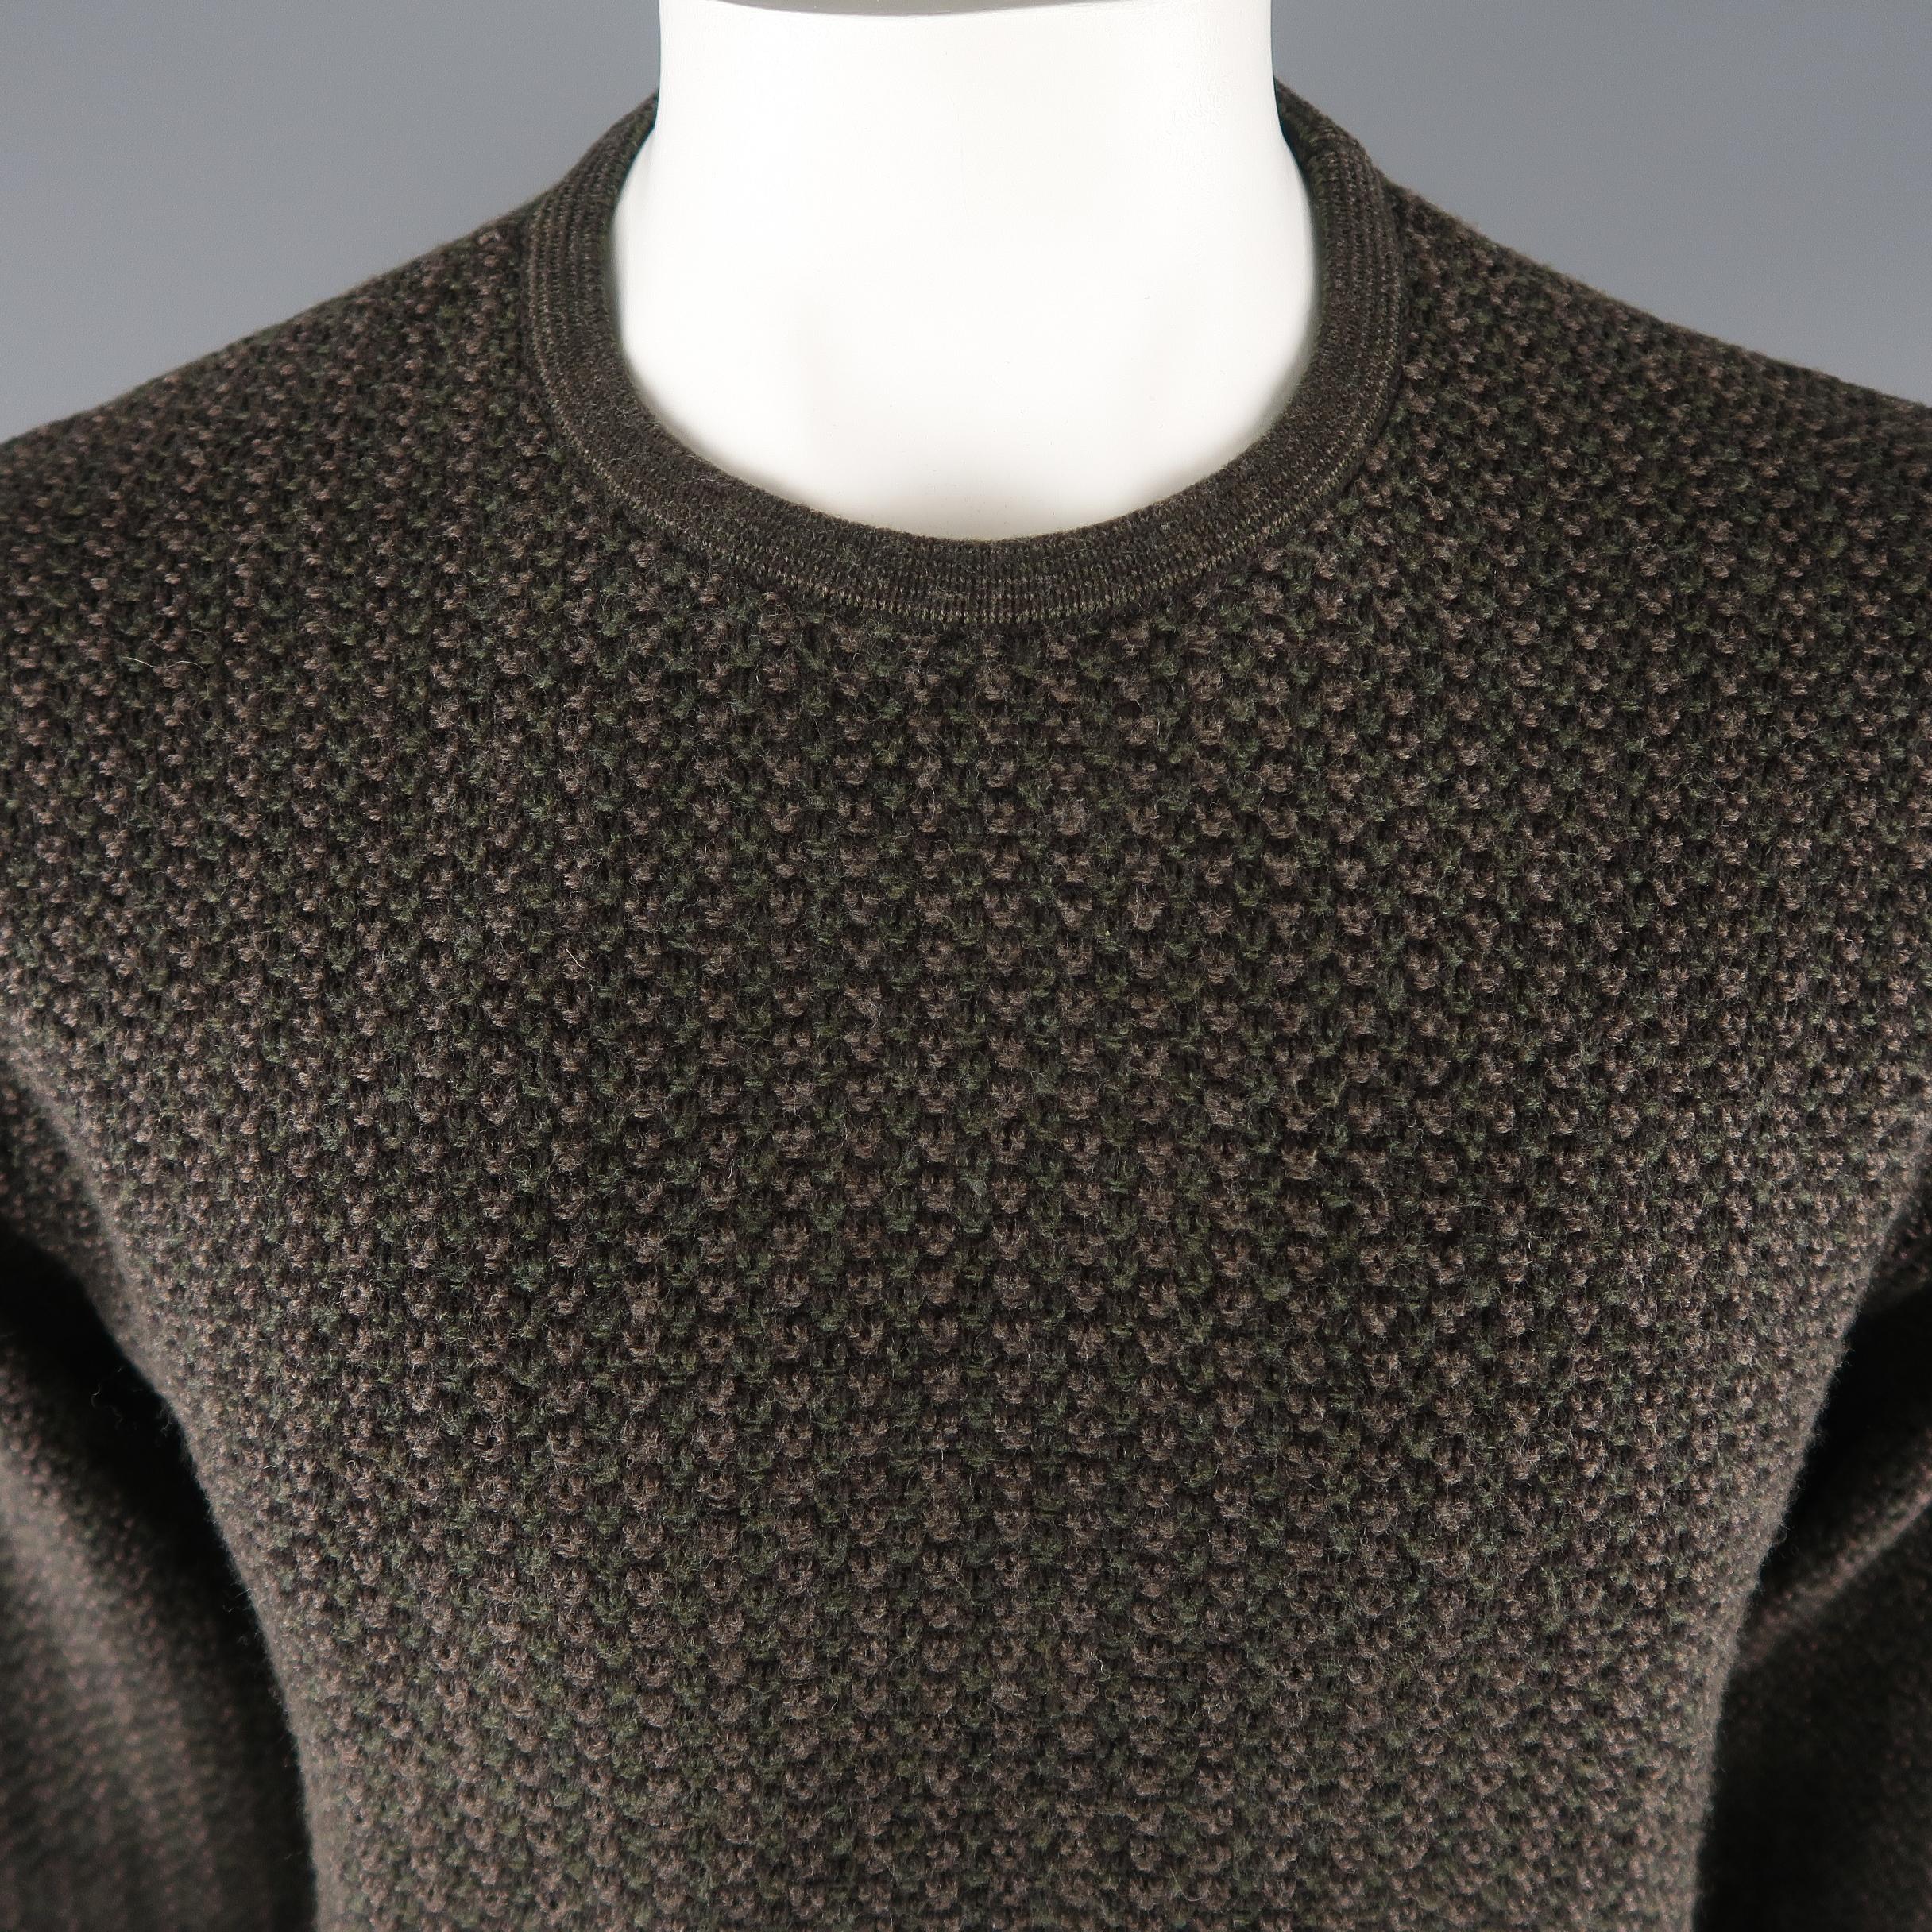 ERMENEGILDO ZEGNA sweater come in a  brown tone, knitted wool / cotton material, with a crewneck and ribbed cuff and waistband. Made in Italy.
 
Excellent Pre-Owned Condition.
Marked: L / 52 IT
 
Measurements:
 
Shoulder: 17 in.
Chest: 46